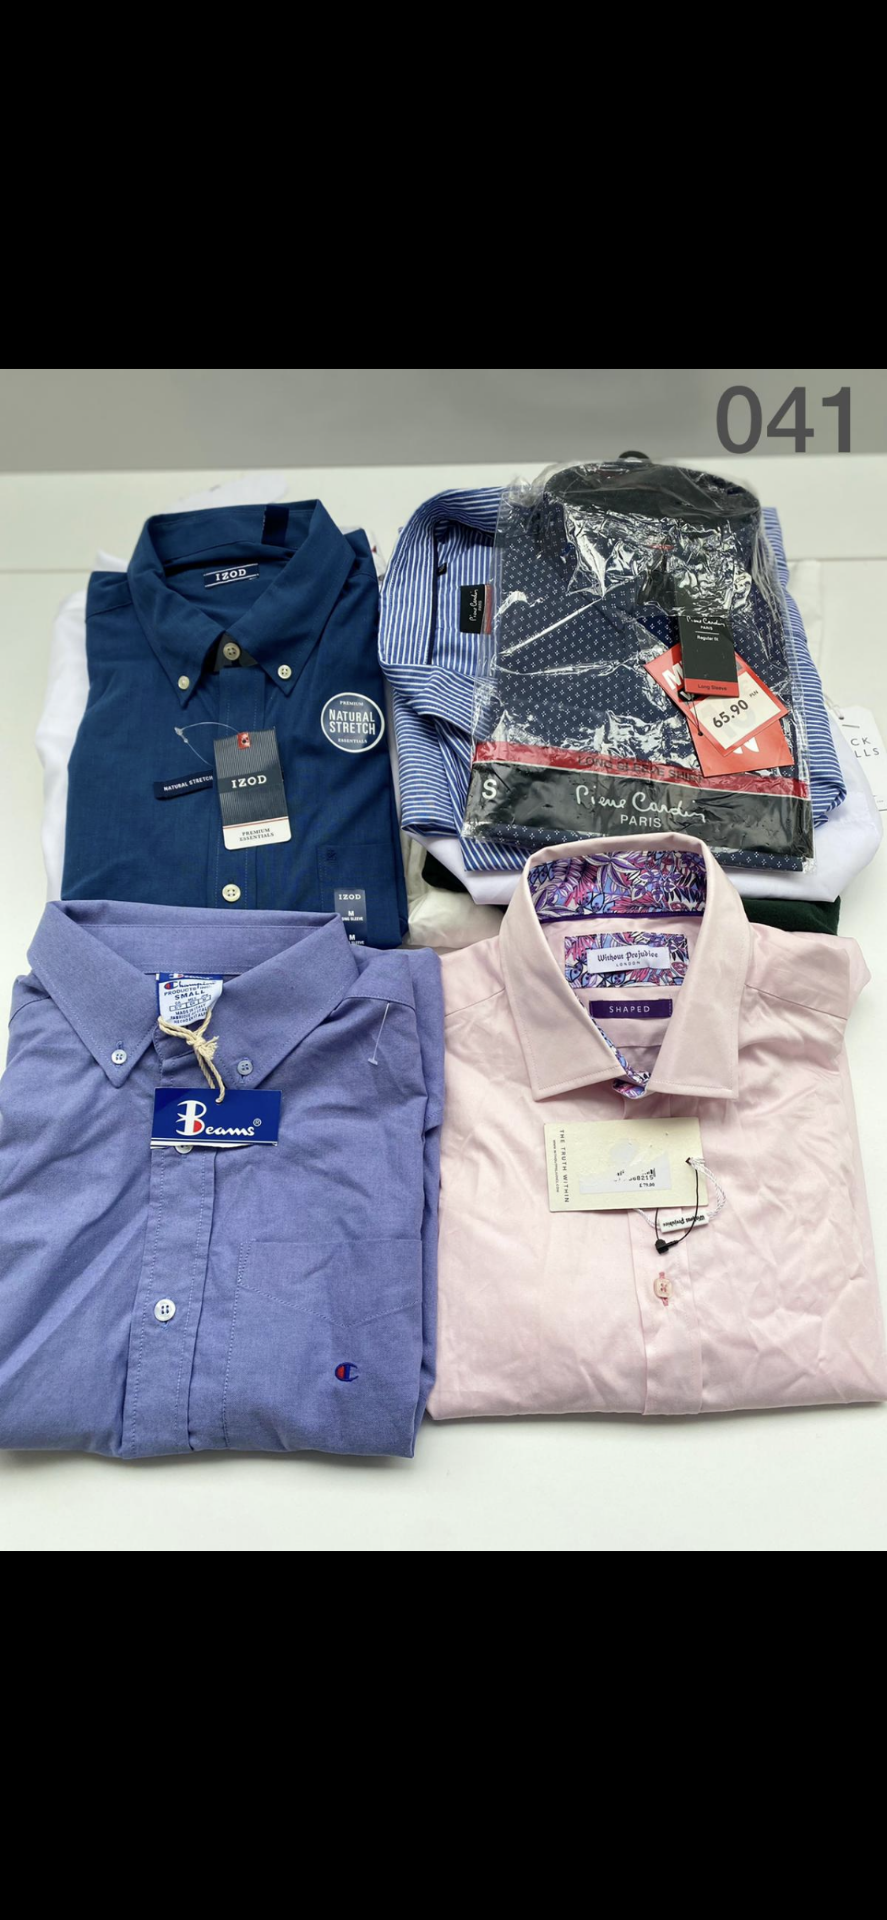 10 PIECE MENS SHIRTS LOT IN VARIOUS SIZES INCLUDING JACK WILLS, IZOD AND CHAMPION RRP £320 041